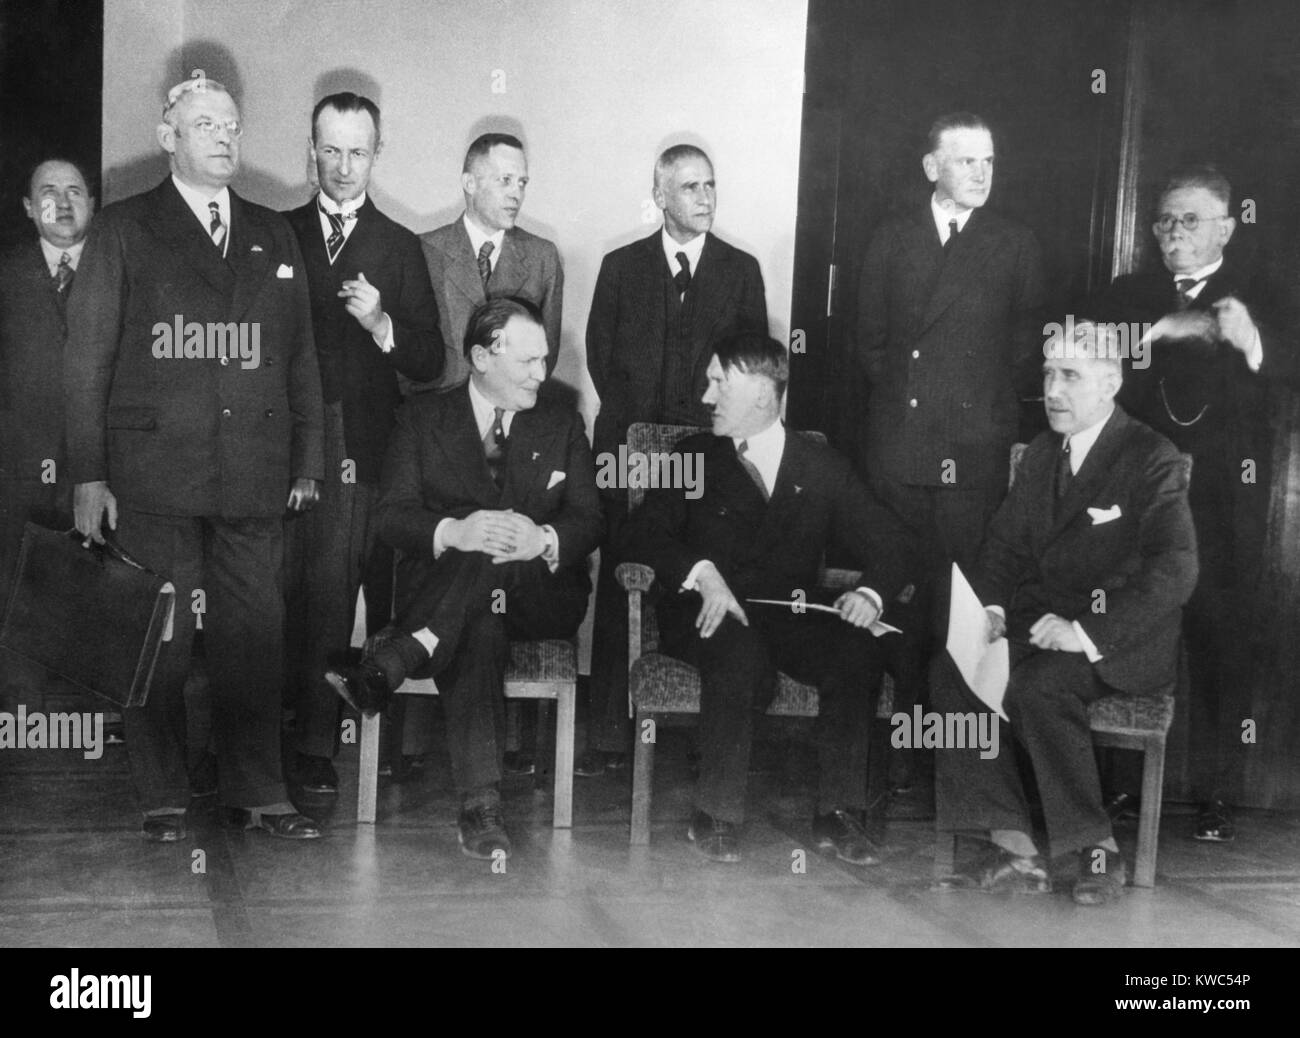 Adolf Hitler and his Cabinet, January 30, 1933, the day he became Prime Minister of Germany. Seated, L-R: Goering, without portfolio, Adolf Hitler, Chancellor; von Papen, Vice-Chancellor. Standing, L-R: Franz Seldt, Labor; Walther Funk, Under-Secretary Propaganda; Guenther Gereke, Reich Commissioner of the Eastern Territories, Lutz Graf Schwerin von Krosigk, Finance; Wilhelm Frick, Domestic Affairs; Werner von Blomberg, Reichswehr-Army; Alfred Hugenberg, Economy and Nutrition. (BSLOC 2015 13 43) Stock Photo